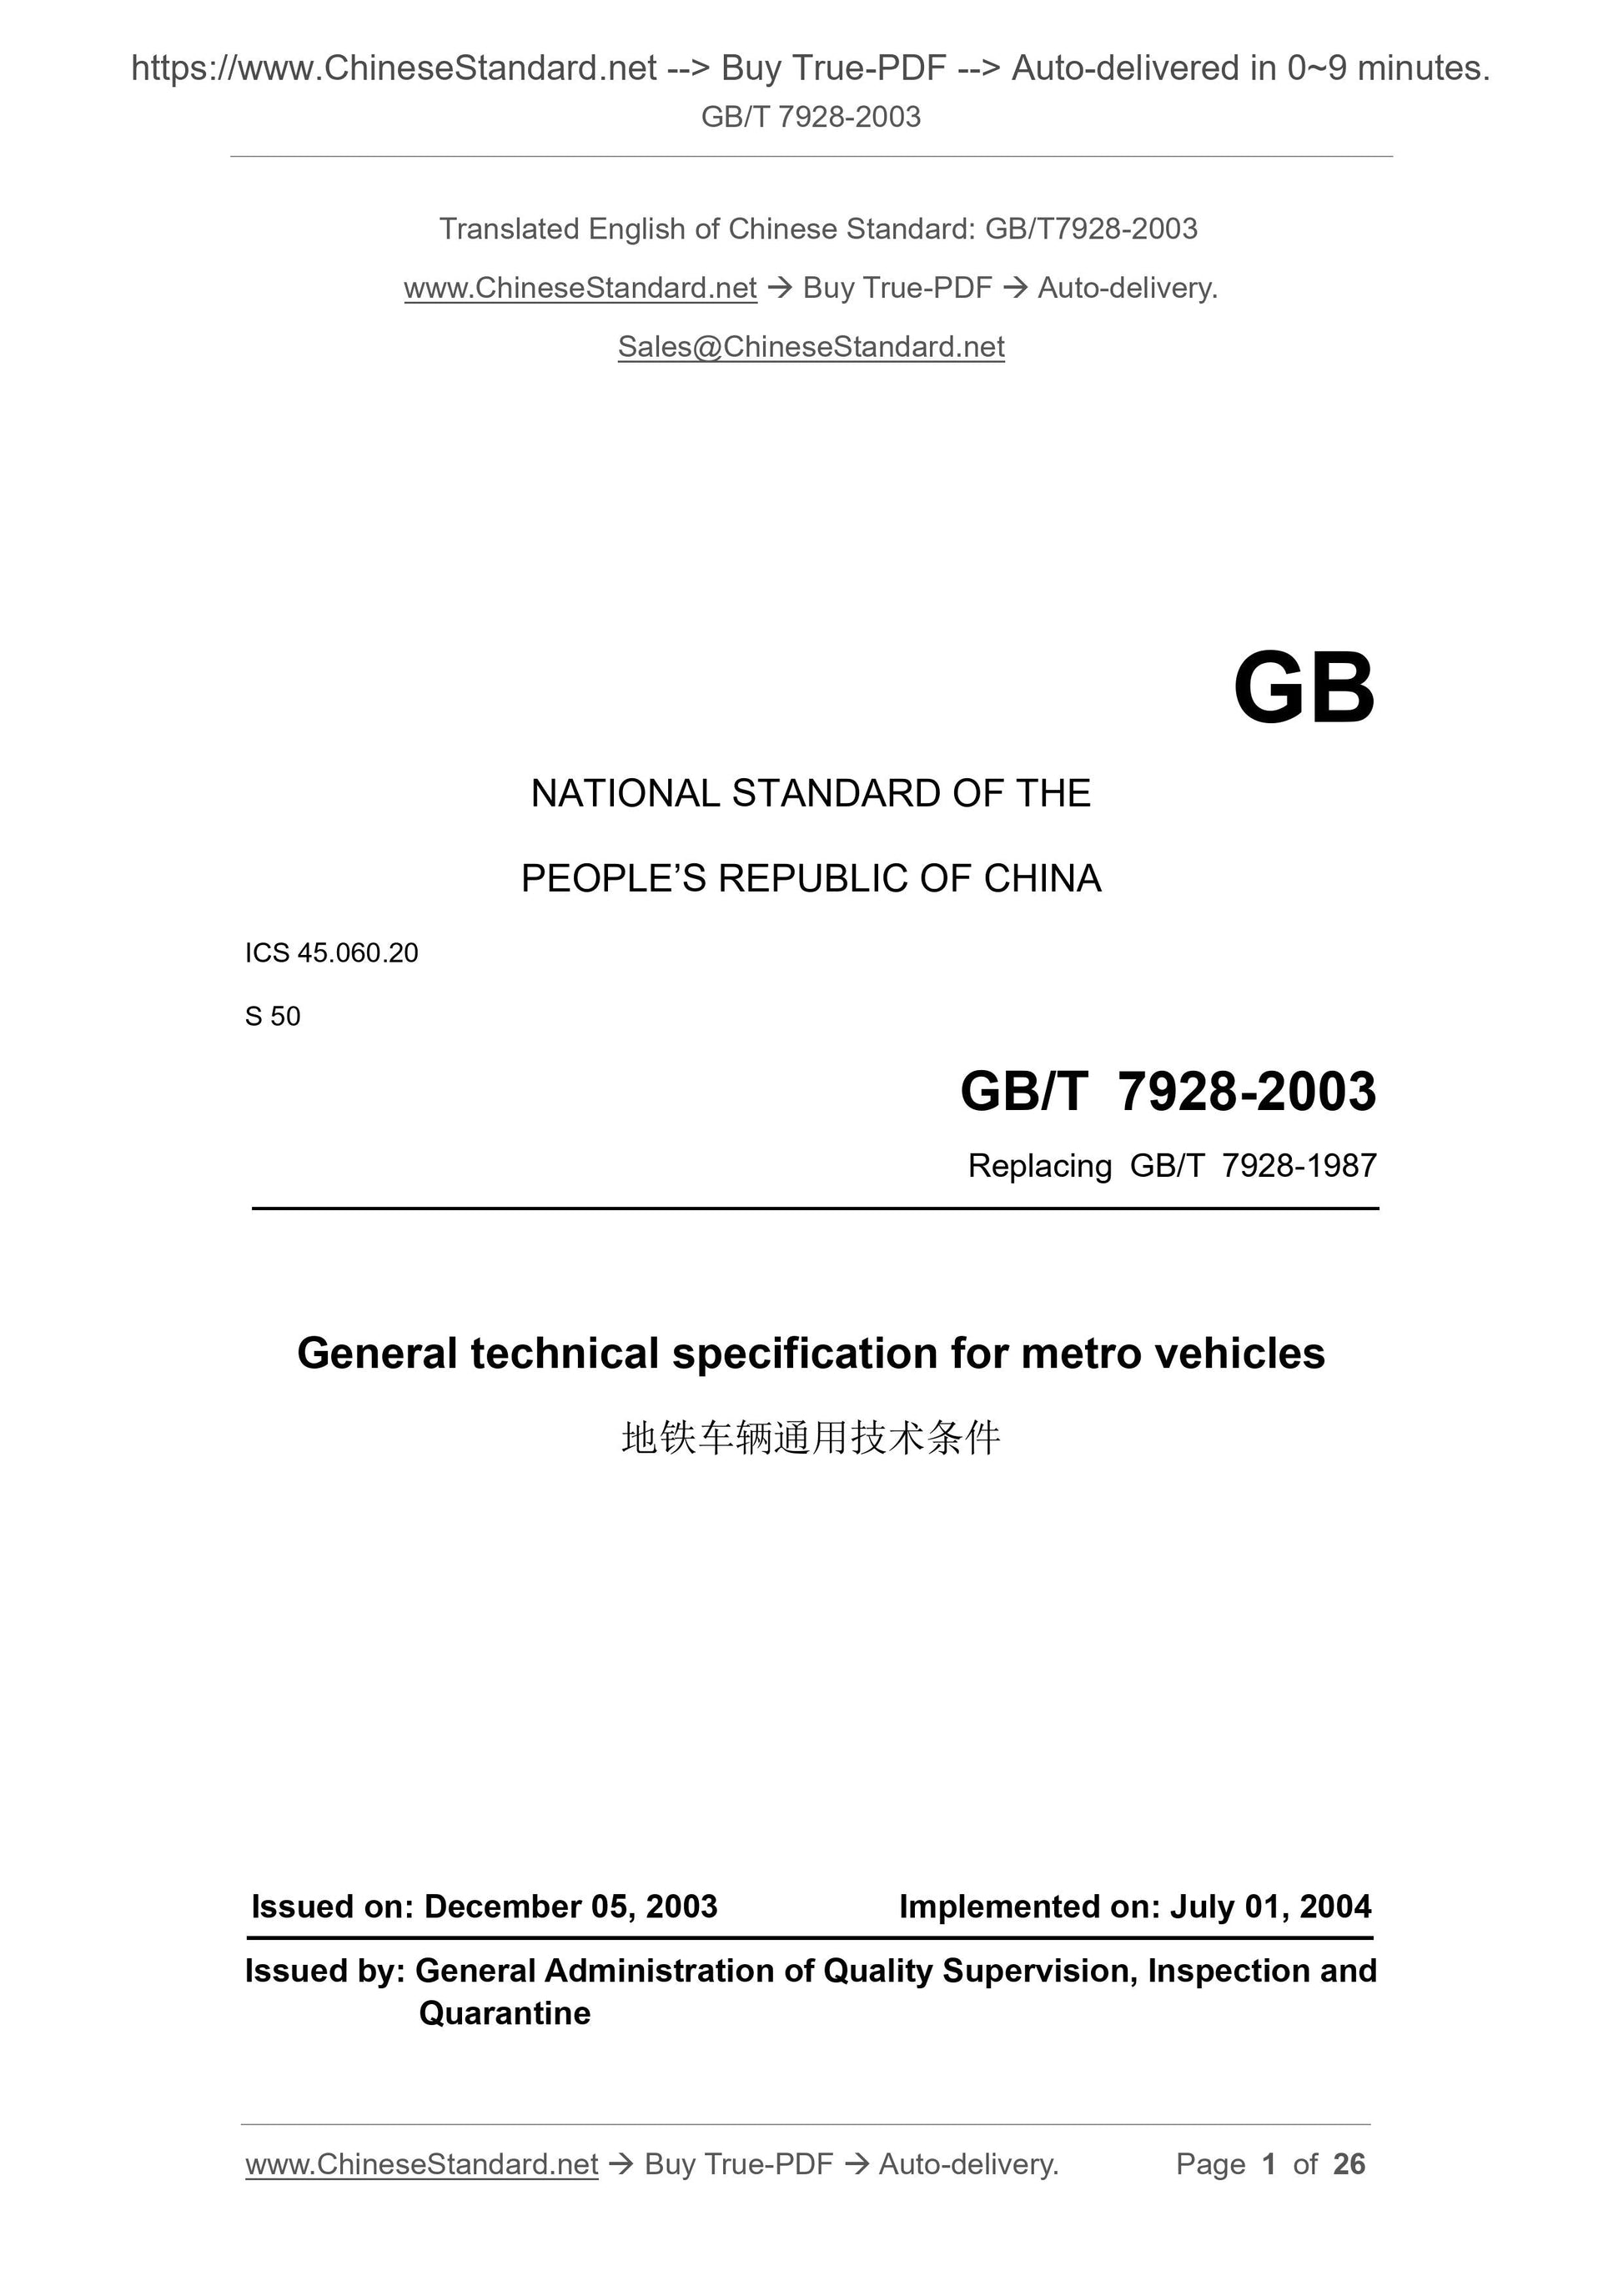 GB/T 7928-2003 Page 1